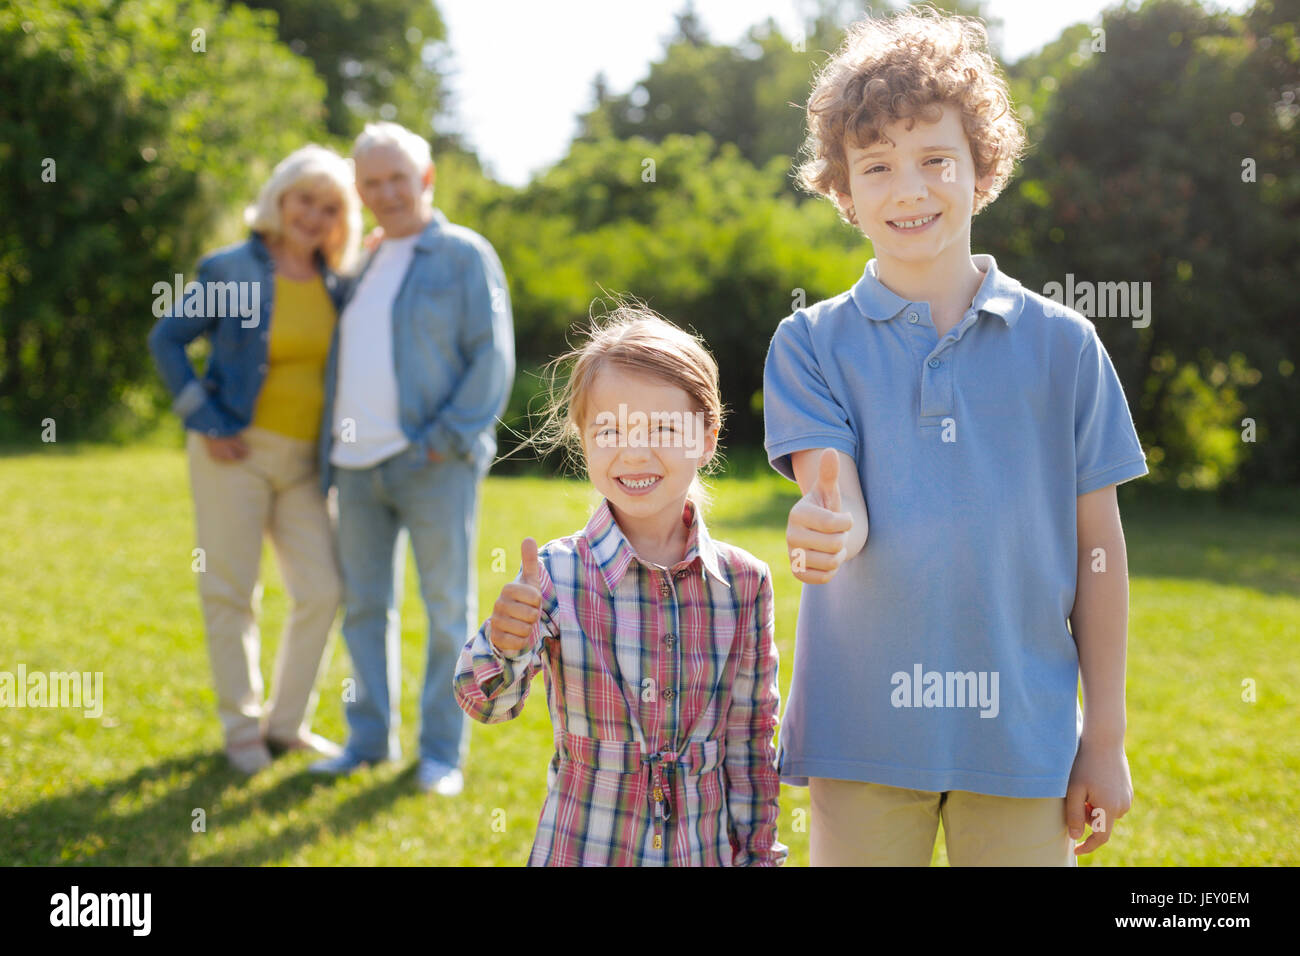 Two children being very friendly Stock Photo